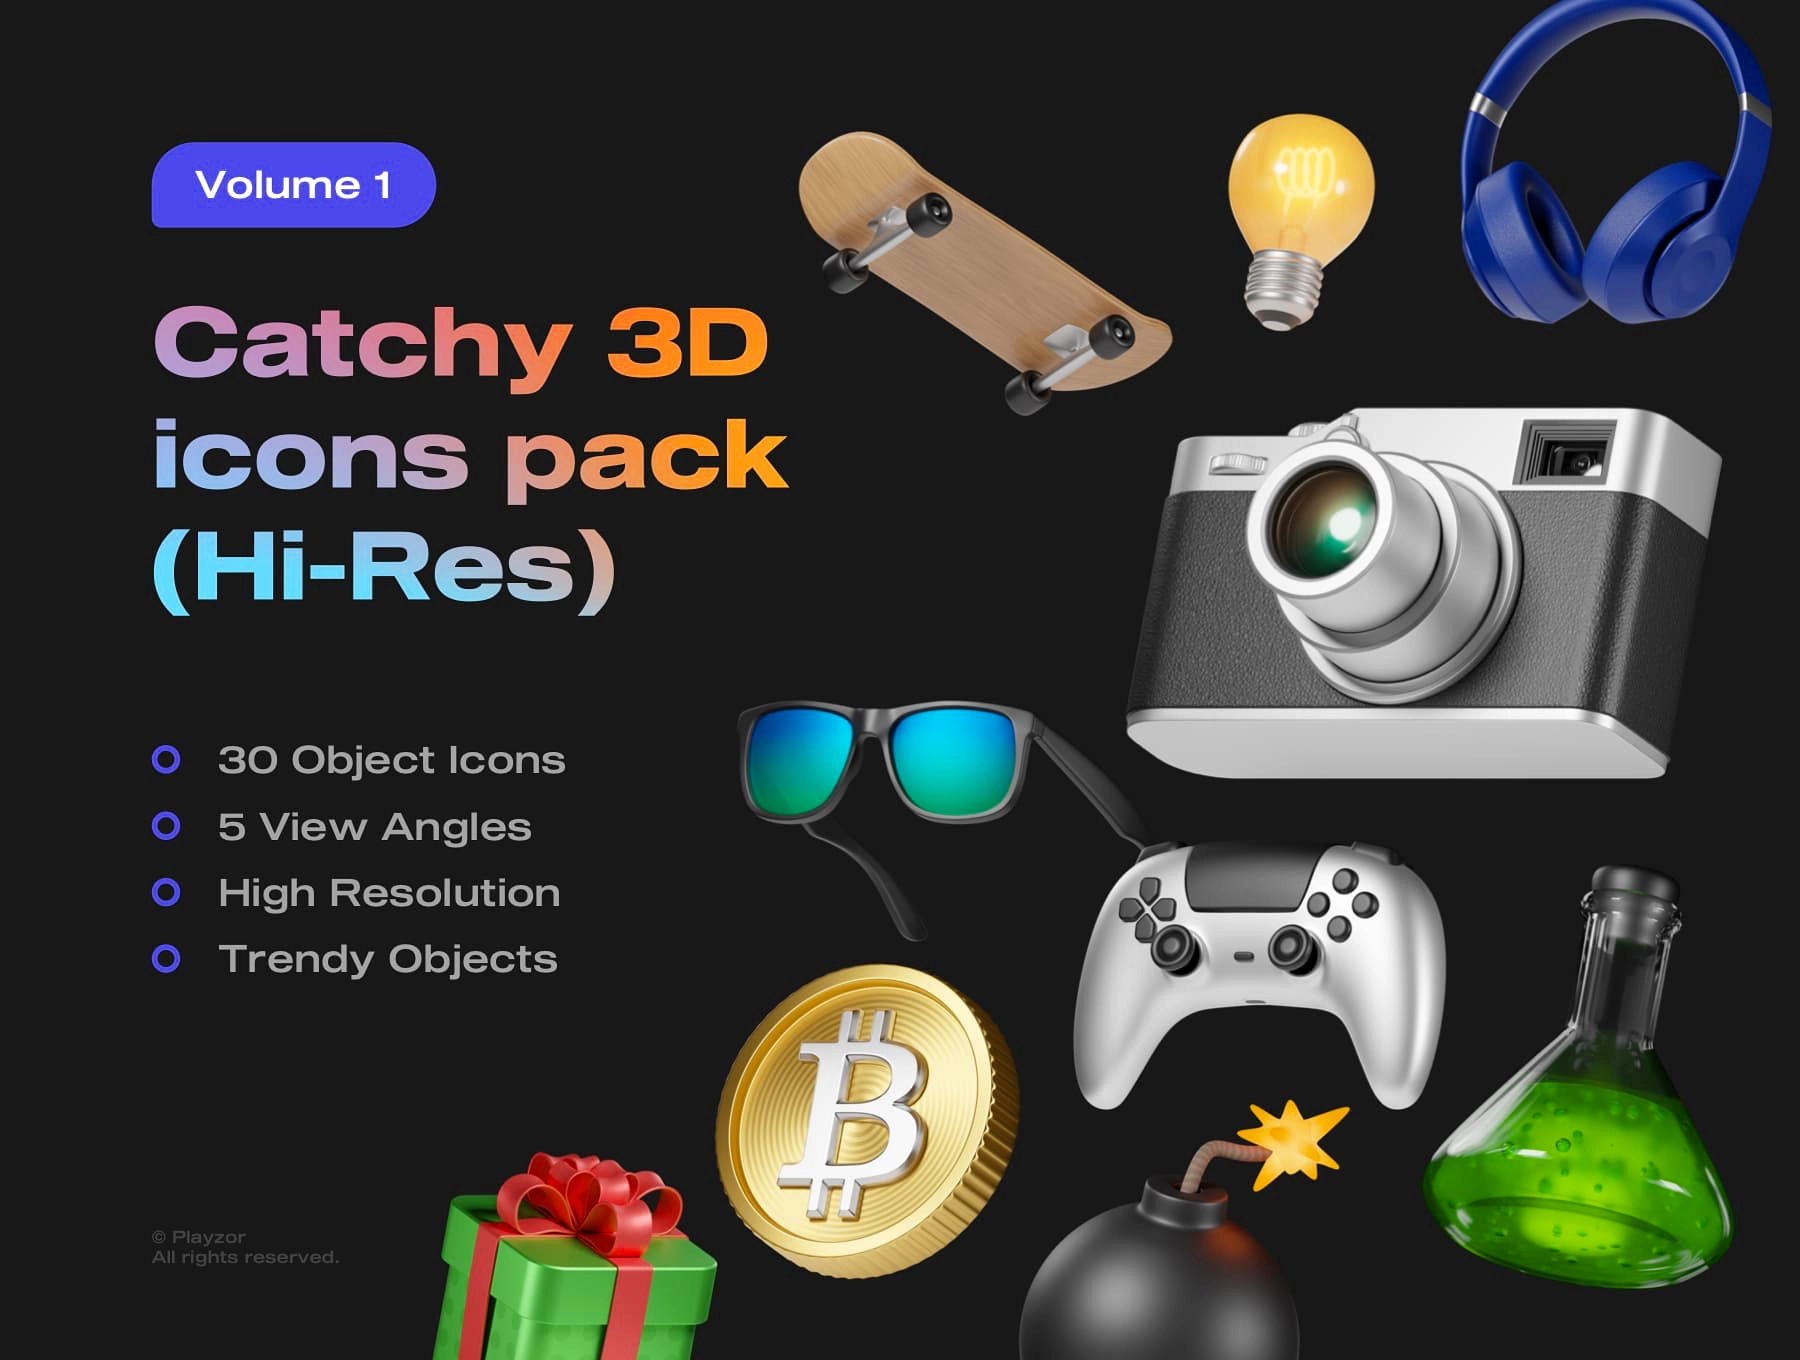 [VIP] Catchy 3D icons pack | Volume 1